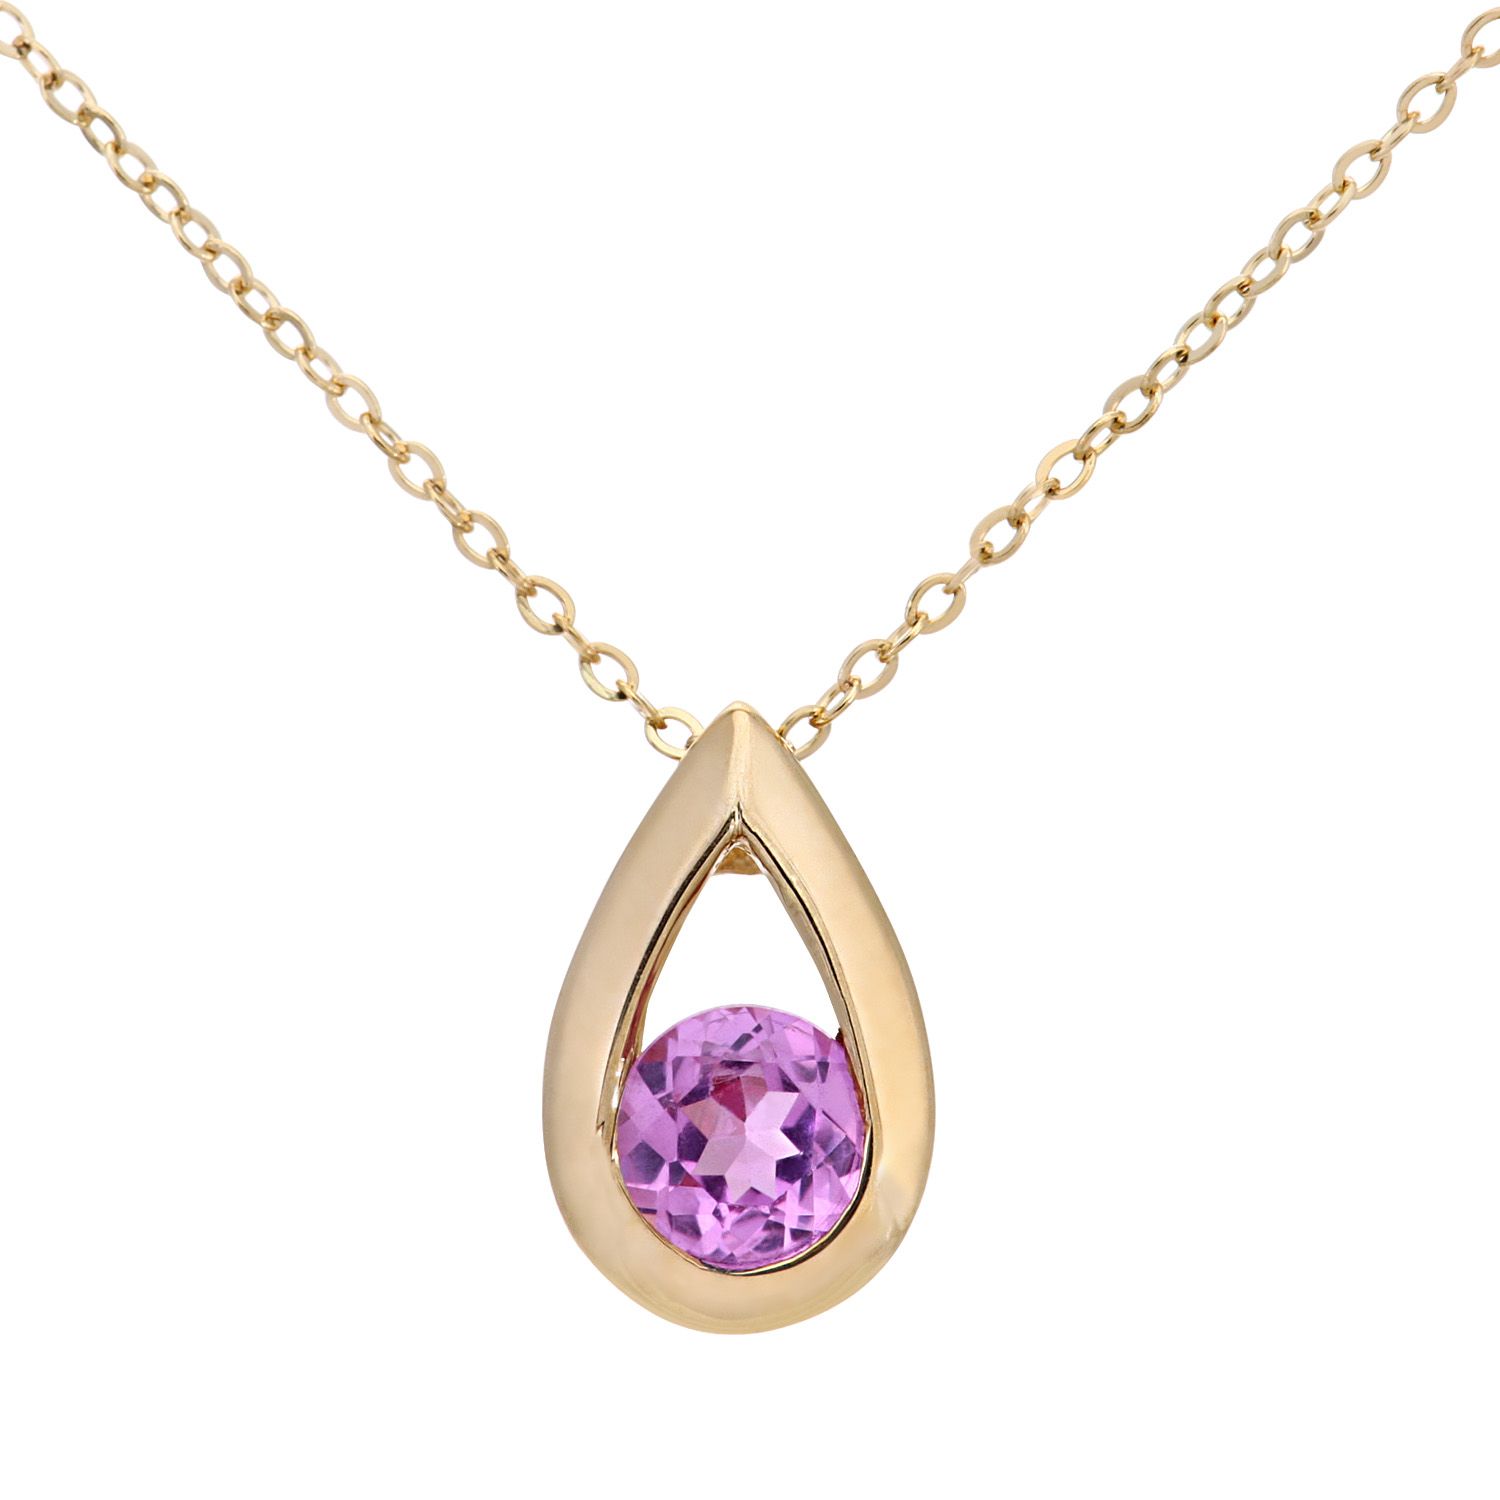 # 9K (375) Yellow Gold: 0.96gr; # Created Pink Sapphire: 0.2ct